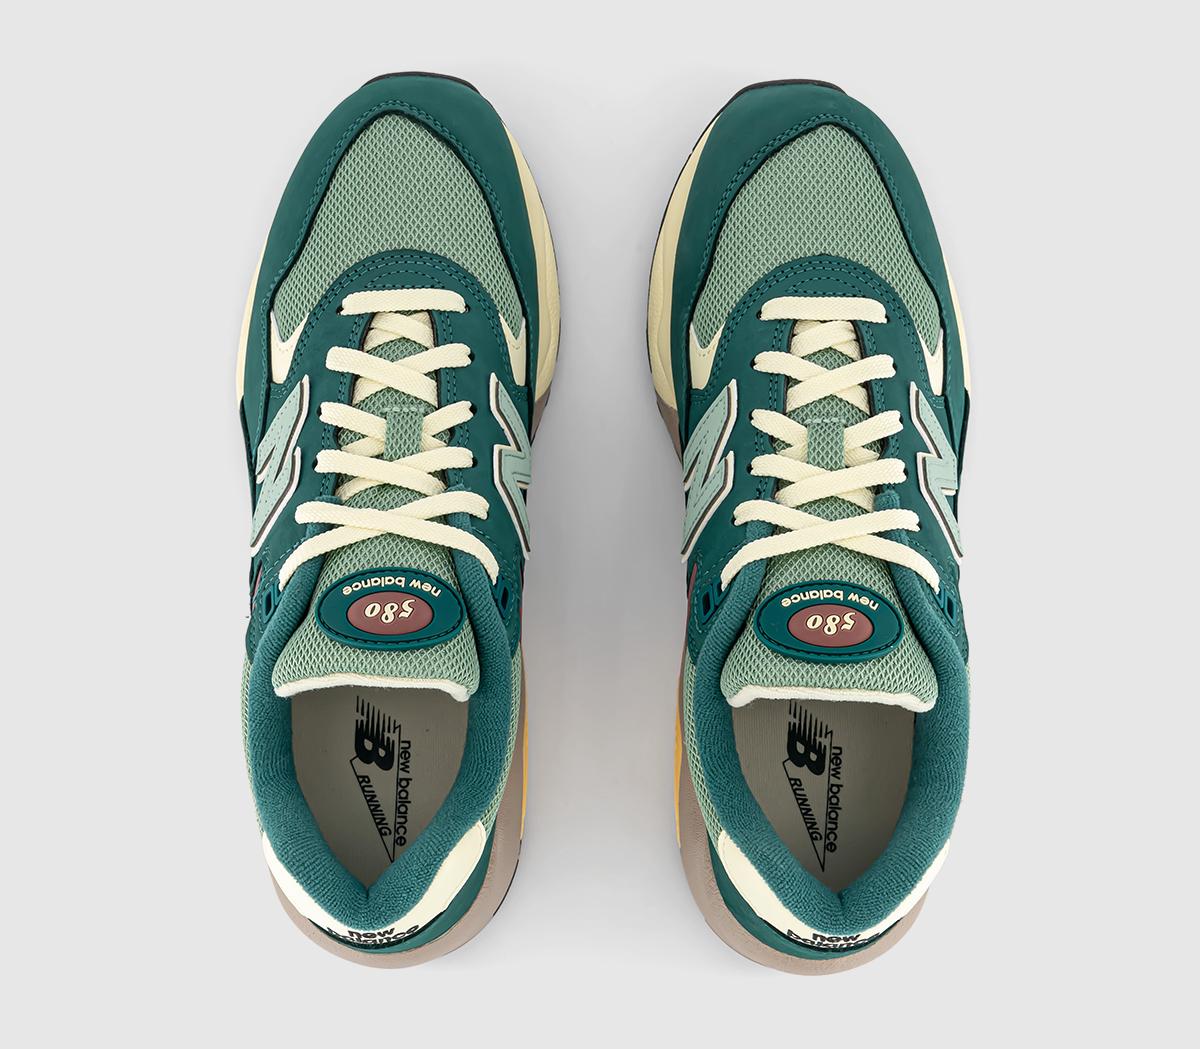 New Balance MT580 Trainers Vintage Teal Green - Men's Trainers